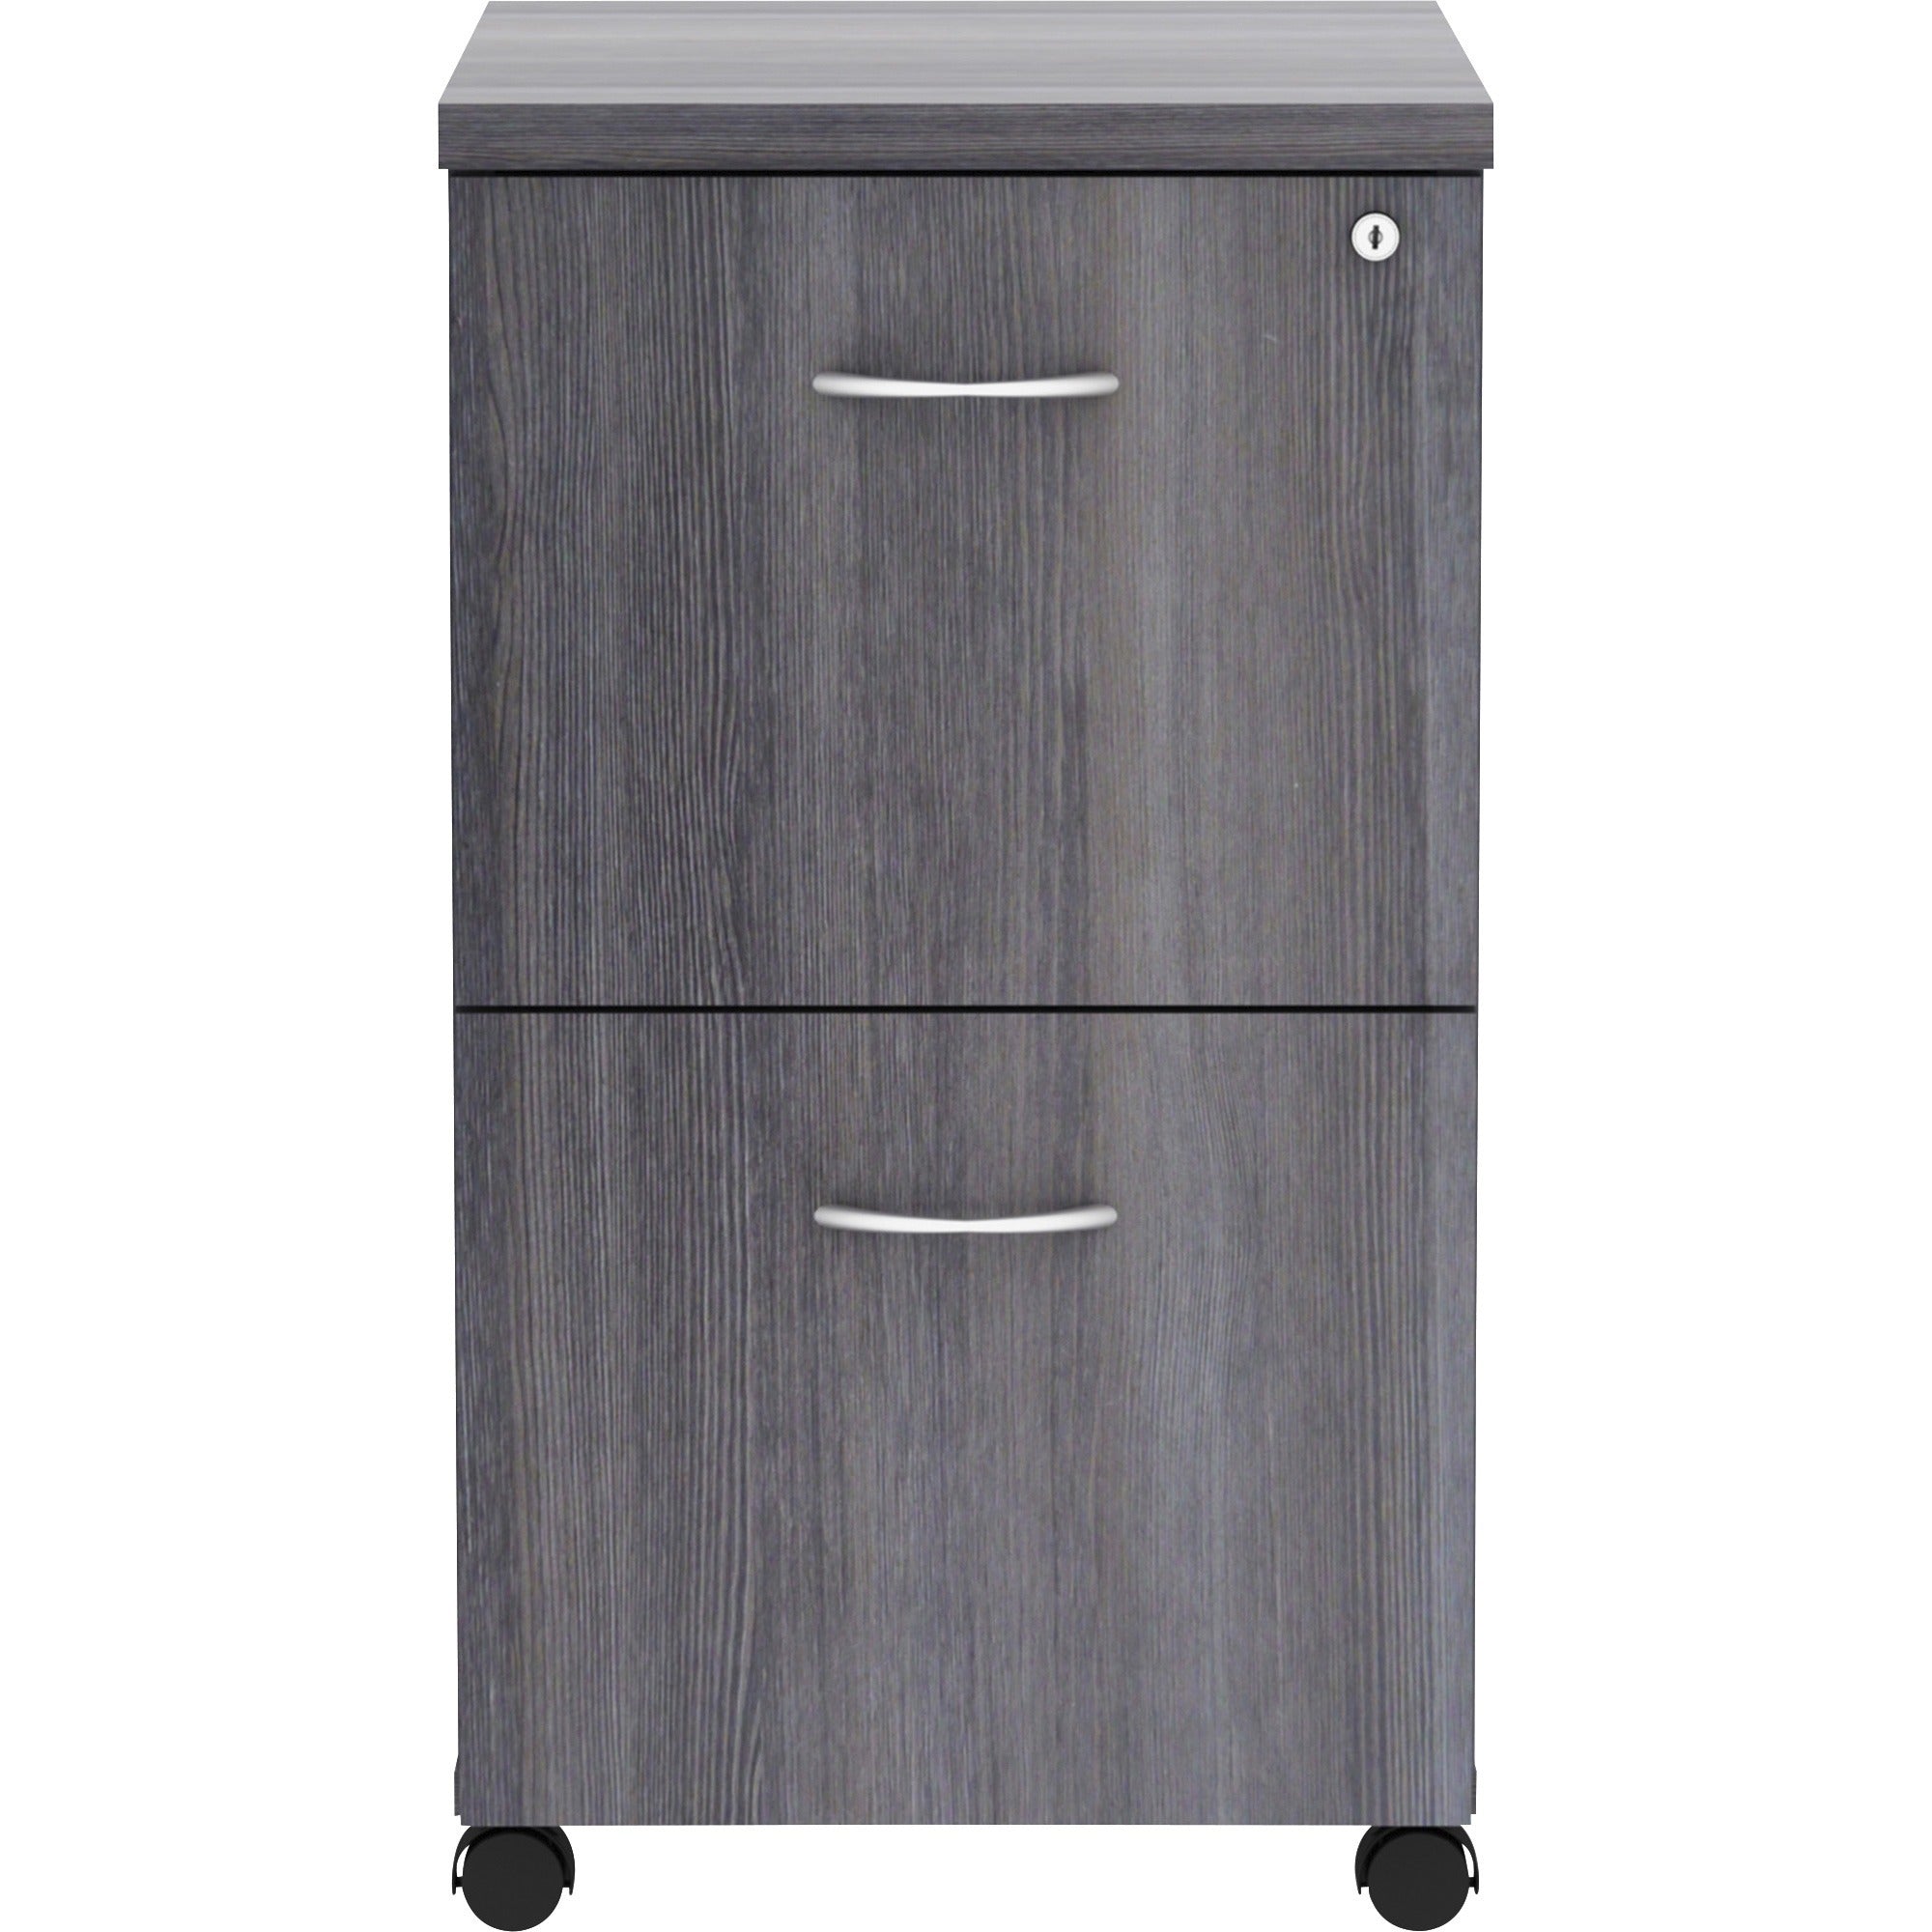 lorell-essentials-series-file-file-mobile-file-cabinet-16-x-22283-2-x-file-drawers-finish-weathered-charcoal-laminate_llr69561 - 2